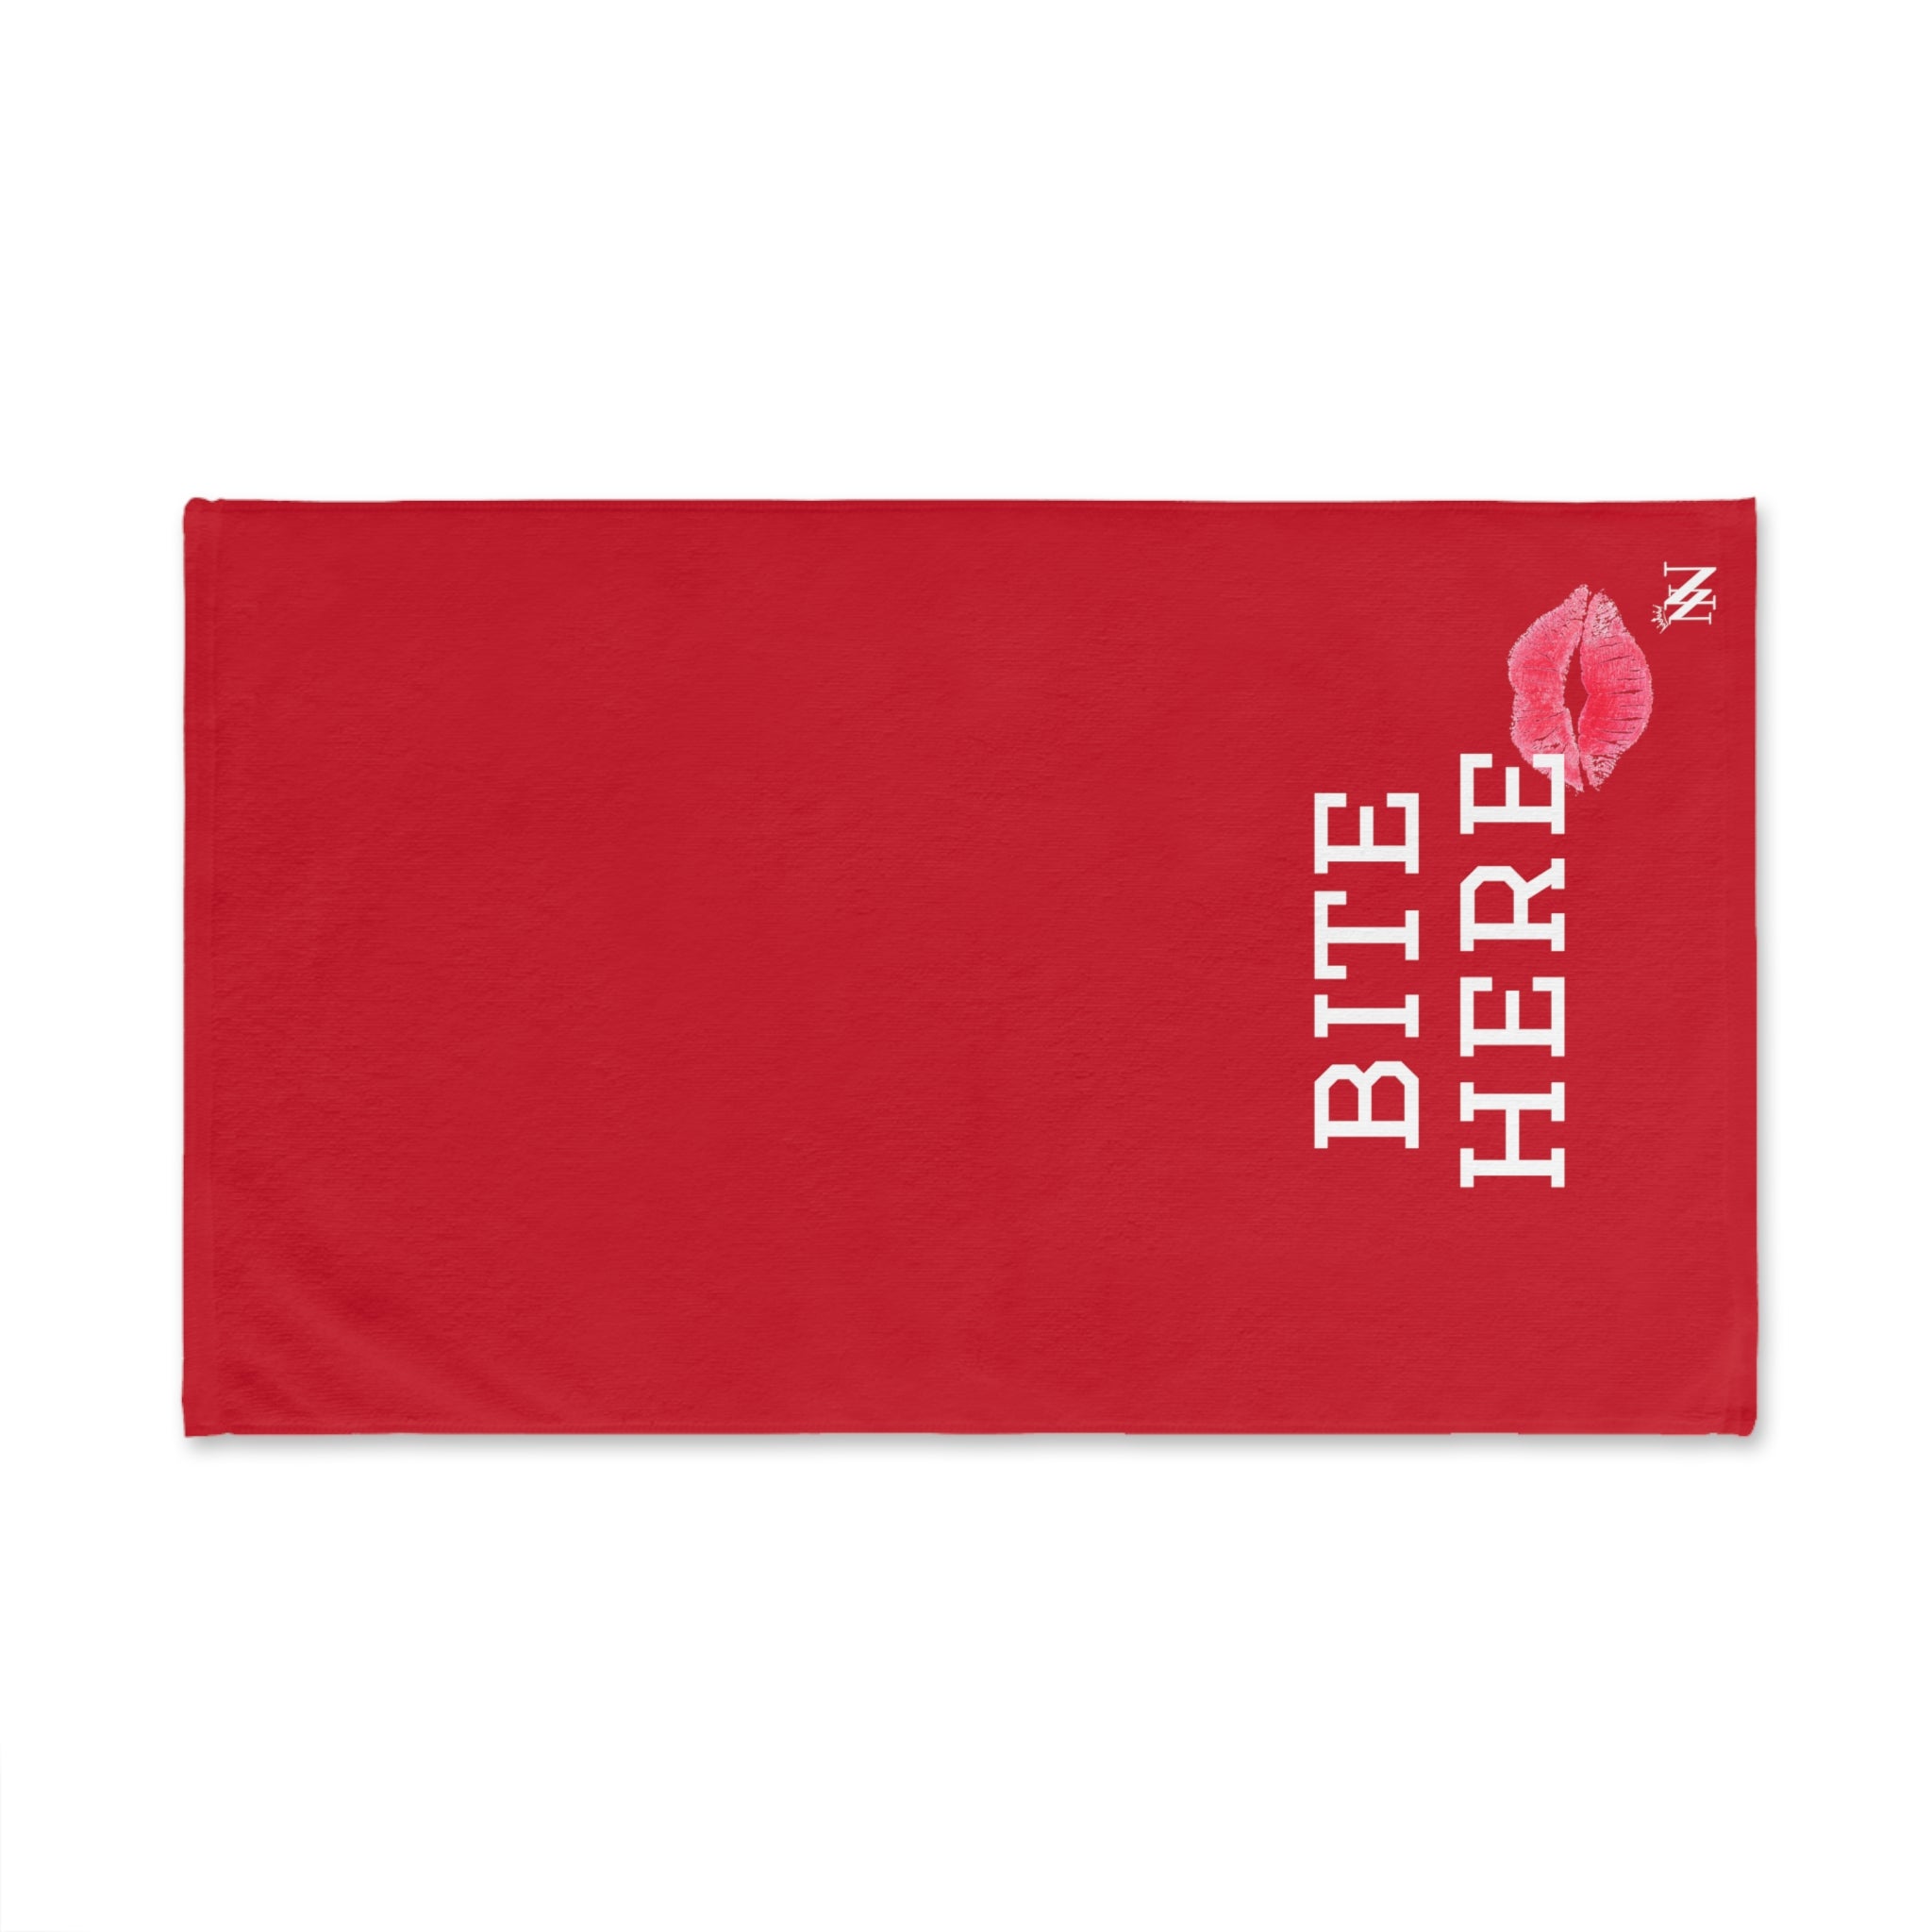 Cheer Bite Here Red | Sexy Gifts for Boyfriend, Funny Towel Romantic Gift for Wedding Couple Fiance First Year 2nd Anniversary Valentines, Party Gag Gifts, Joke Humor Cloth for Husband Men BF NECTAR NAPKINS